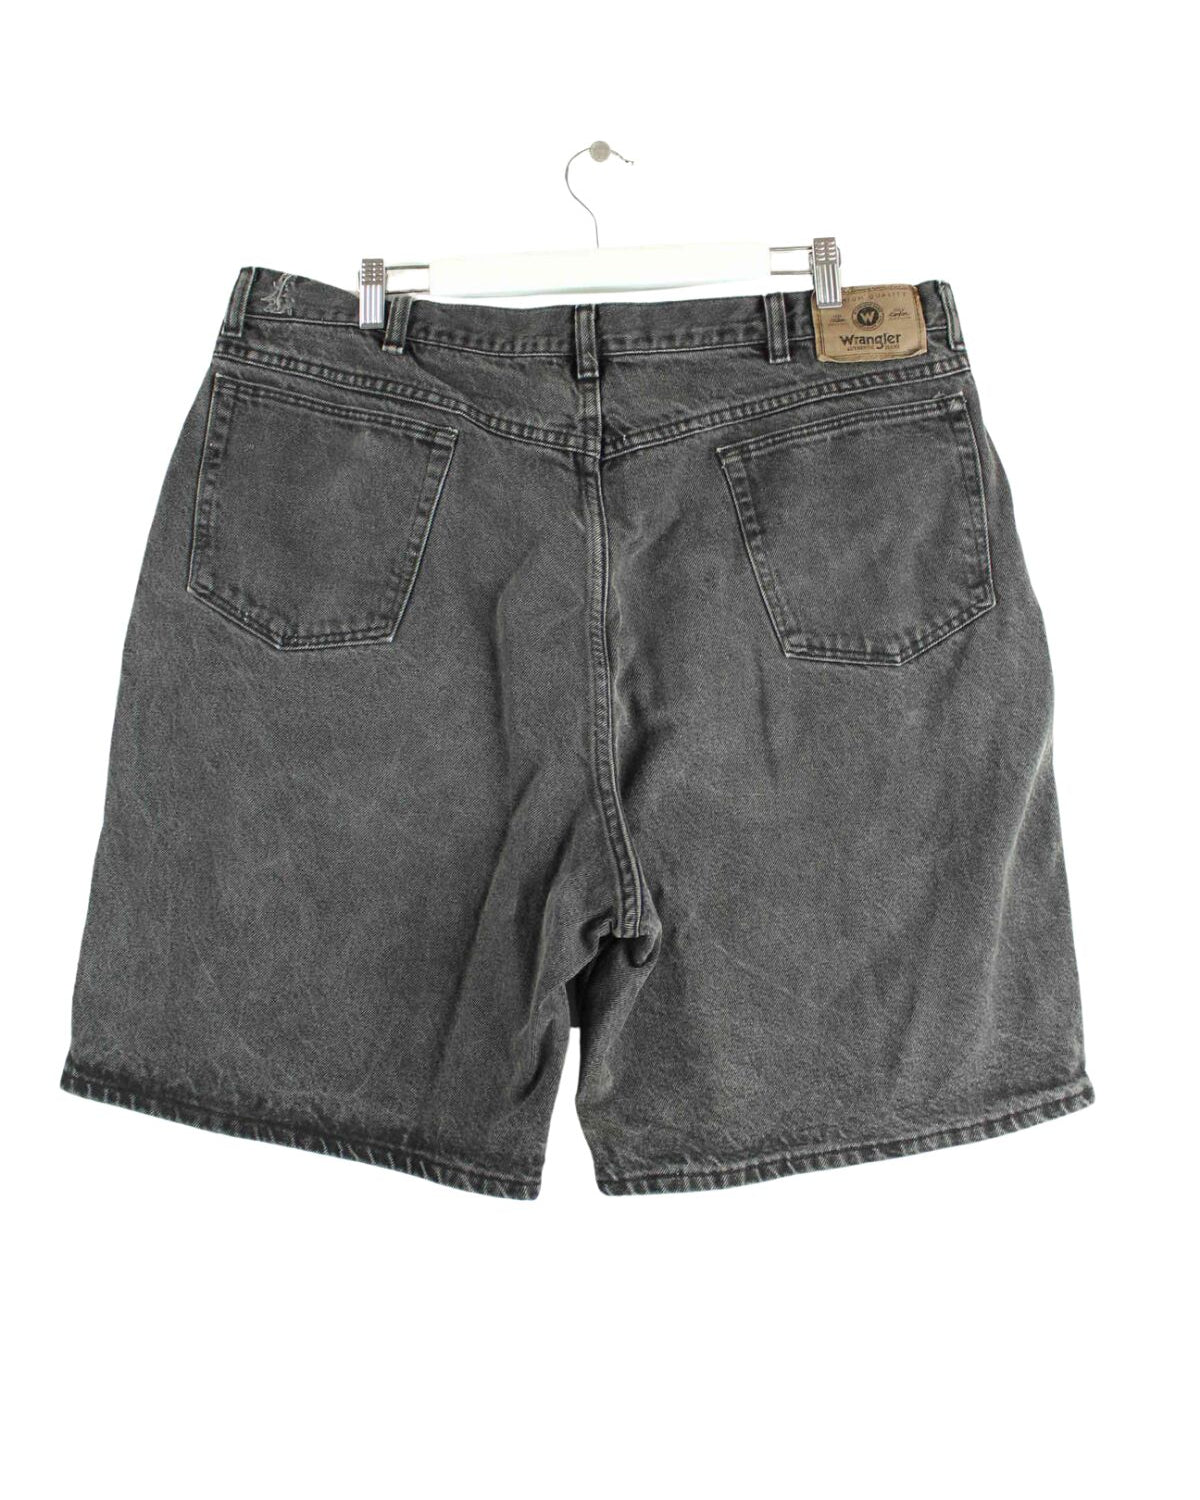 Wrangler Relaxed Fit Shorts Grau W40 (back image)